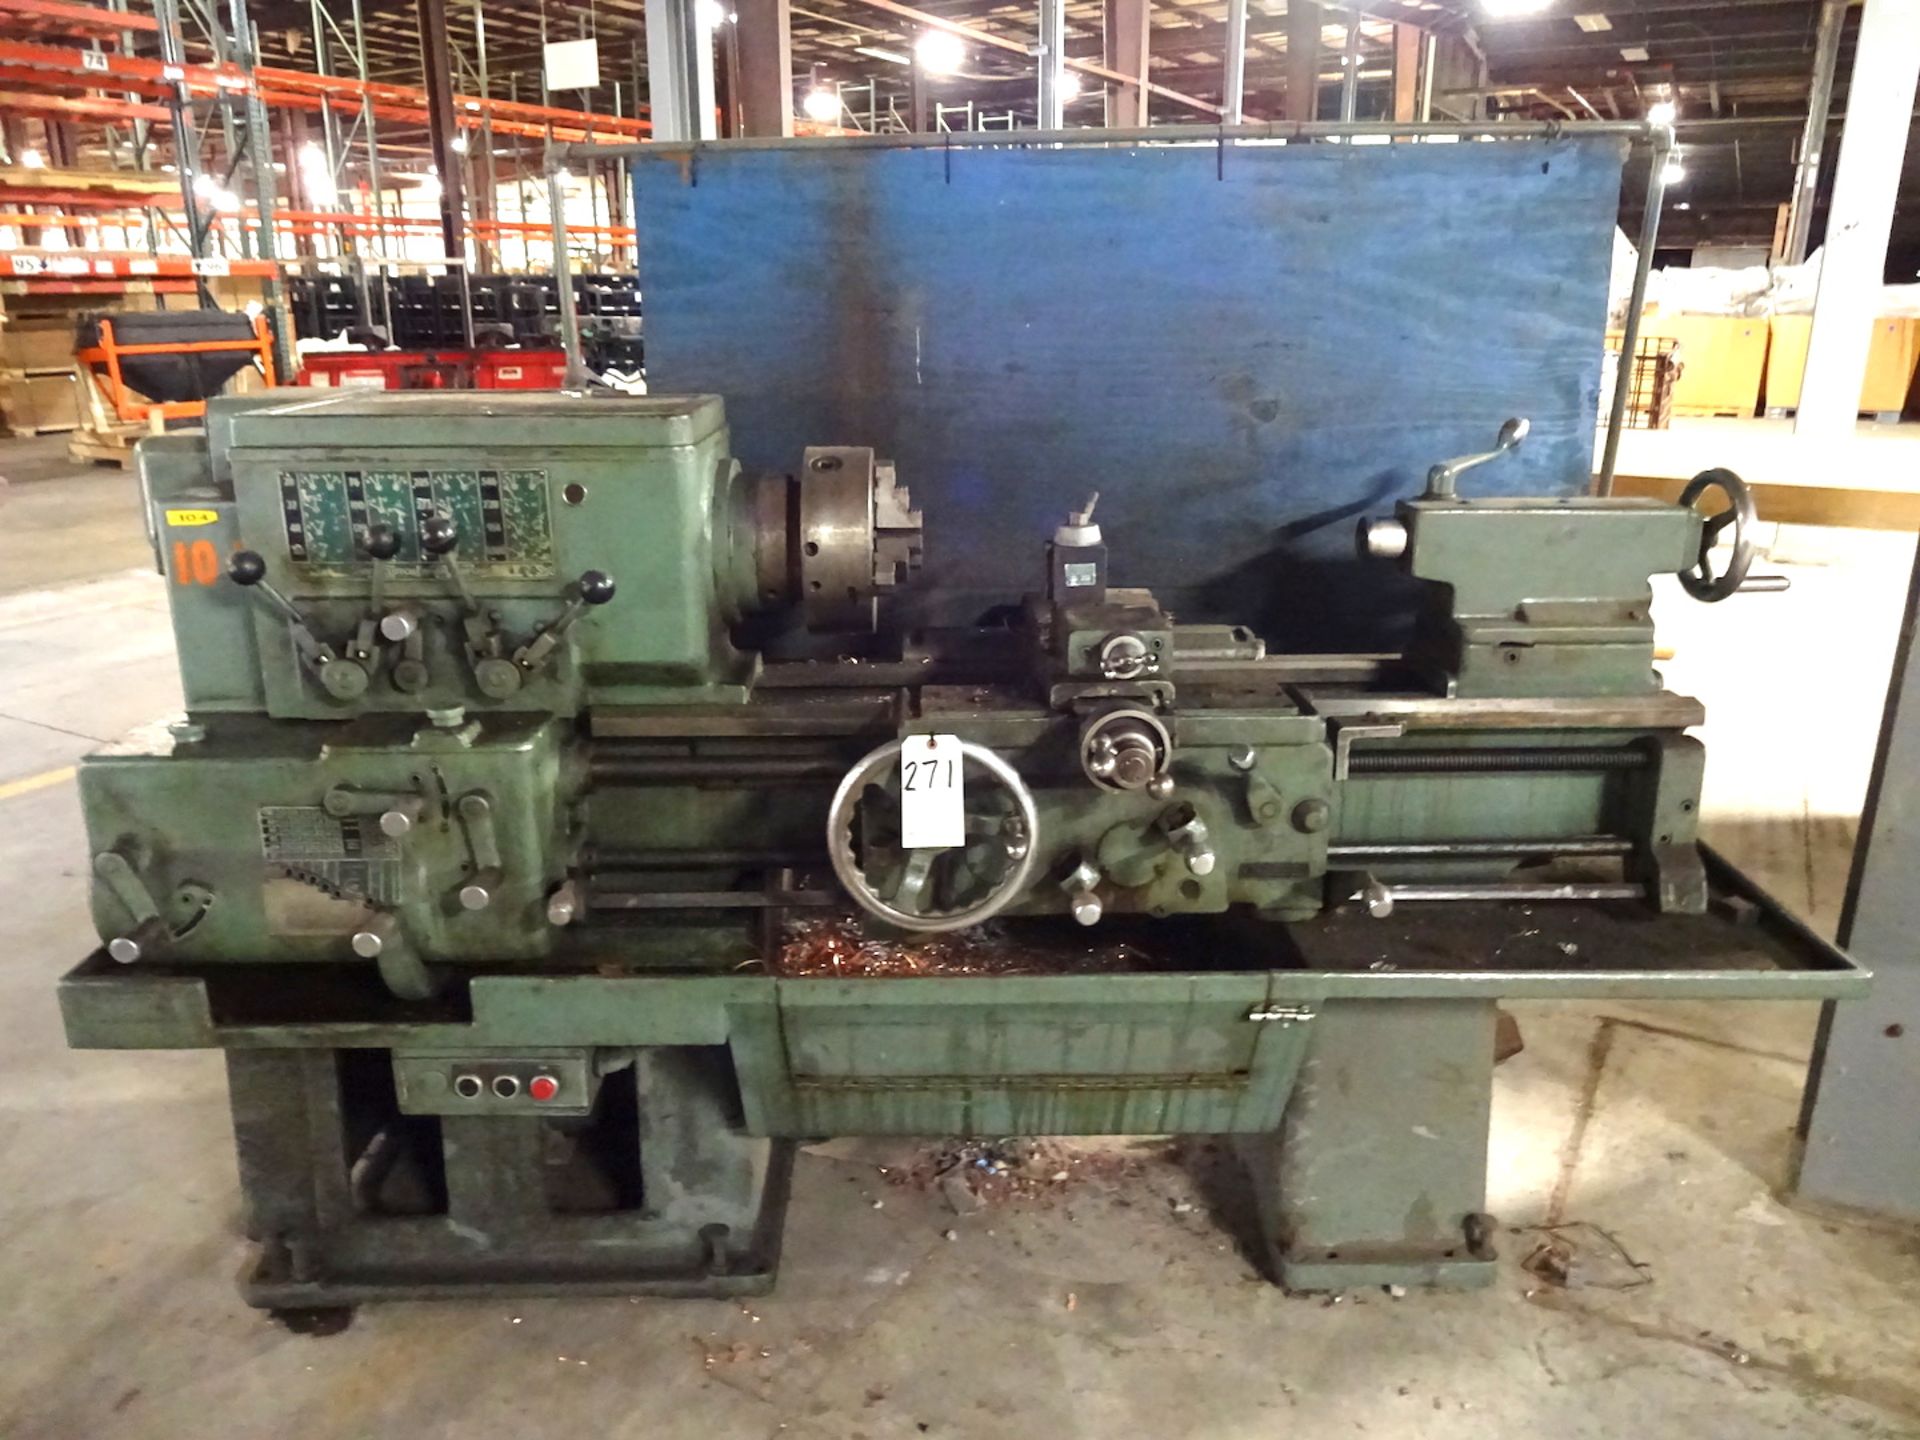 Mfr. Unknown 16 in. x 30 in. (approx.) Engine Lathe, 28 - 1200 RPM, Inch Threading, 10 in. 3-Jaw